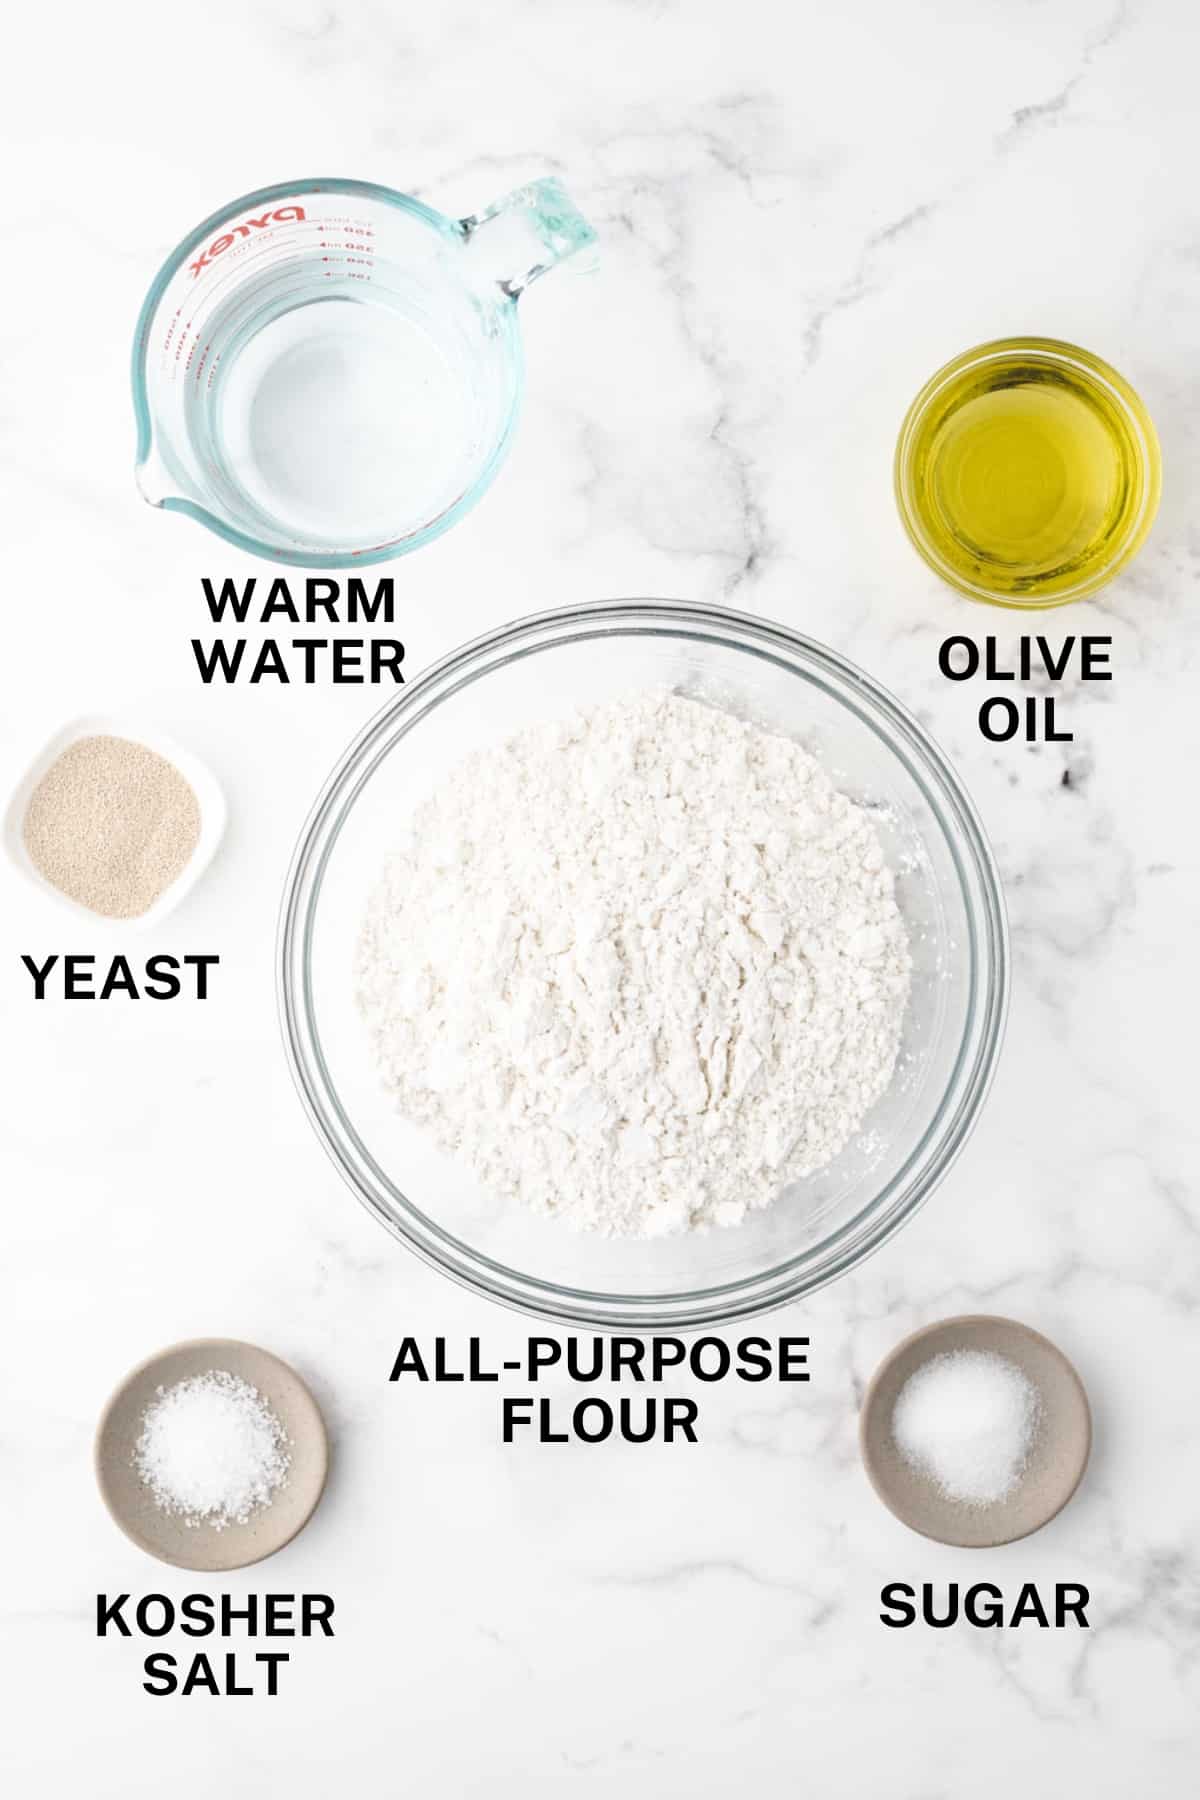 A labeled image of ingredients needed to make no-rise pizza dough.